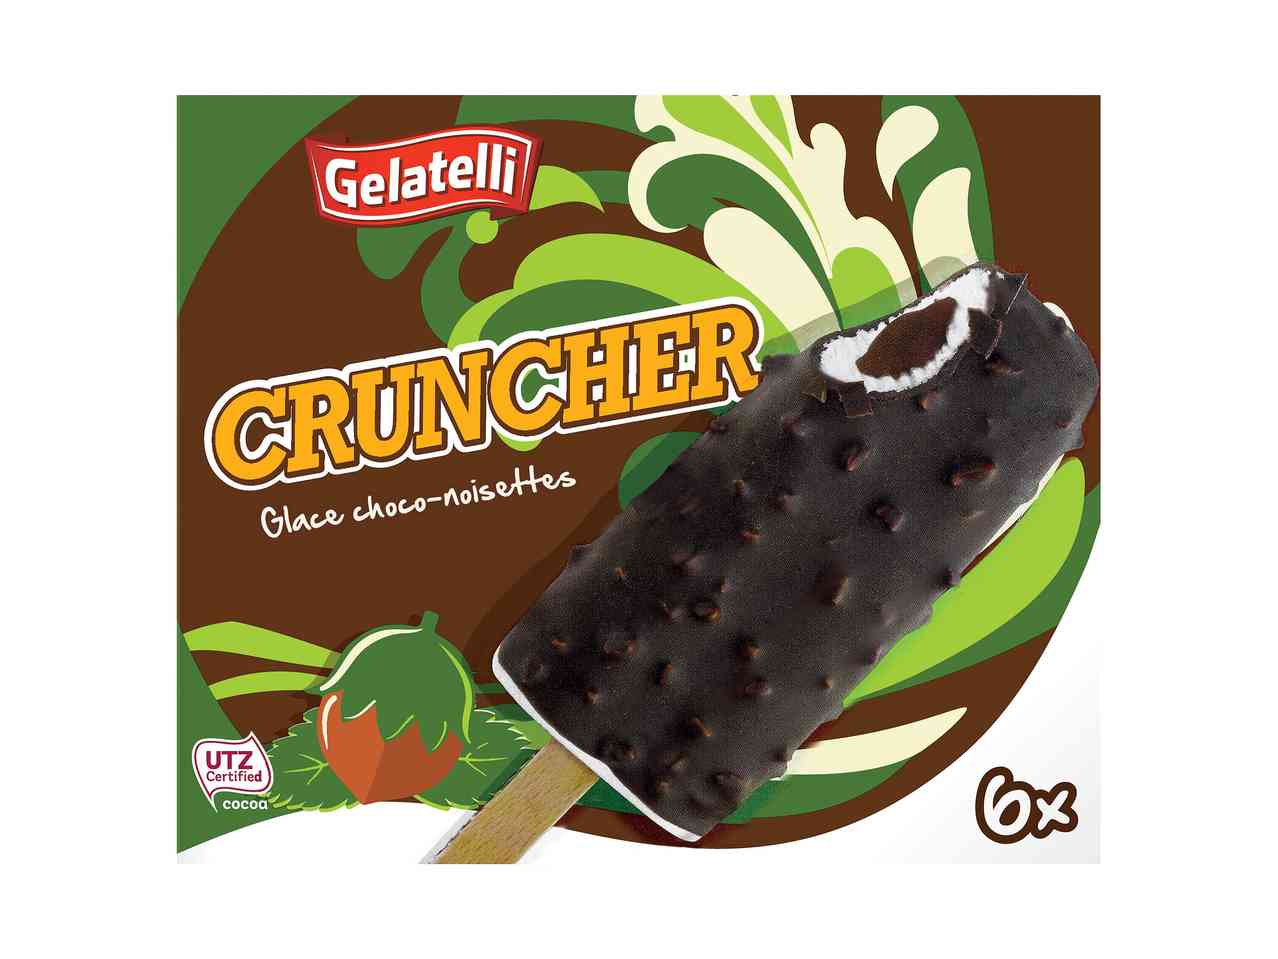 6 glaces cruncher1